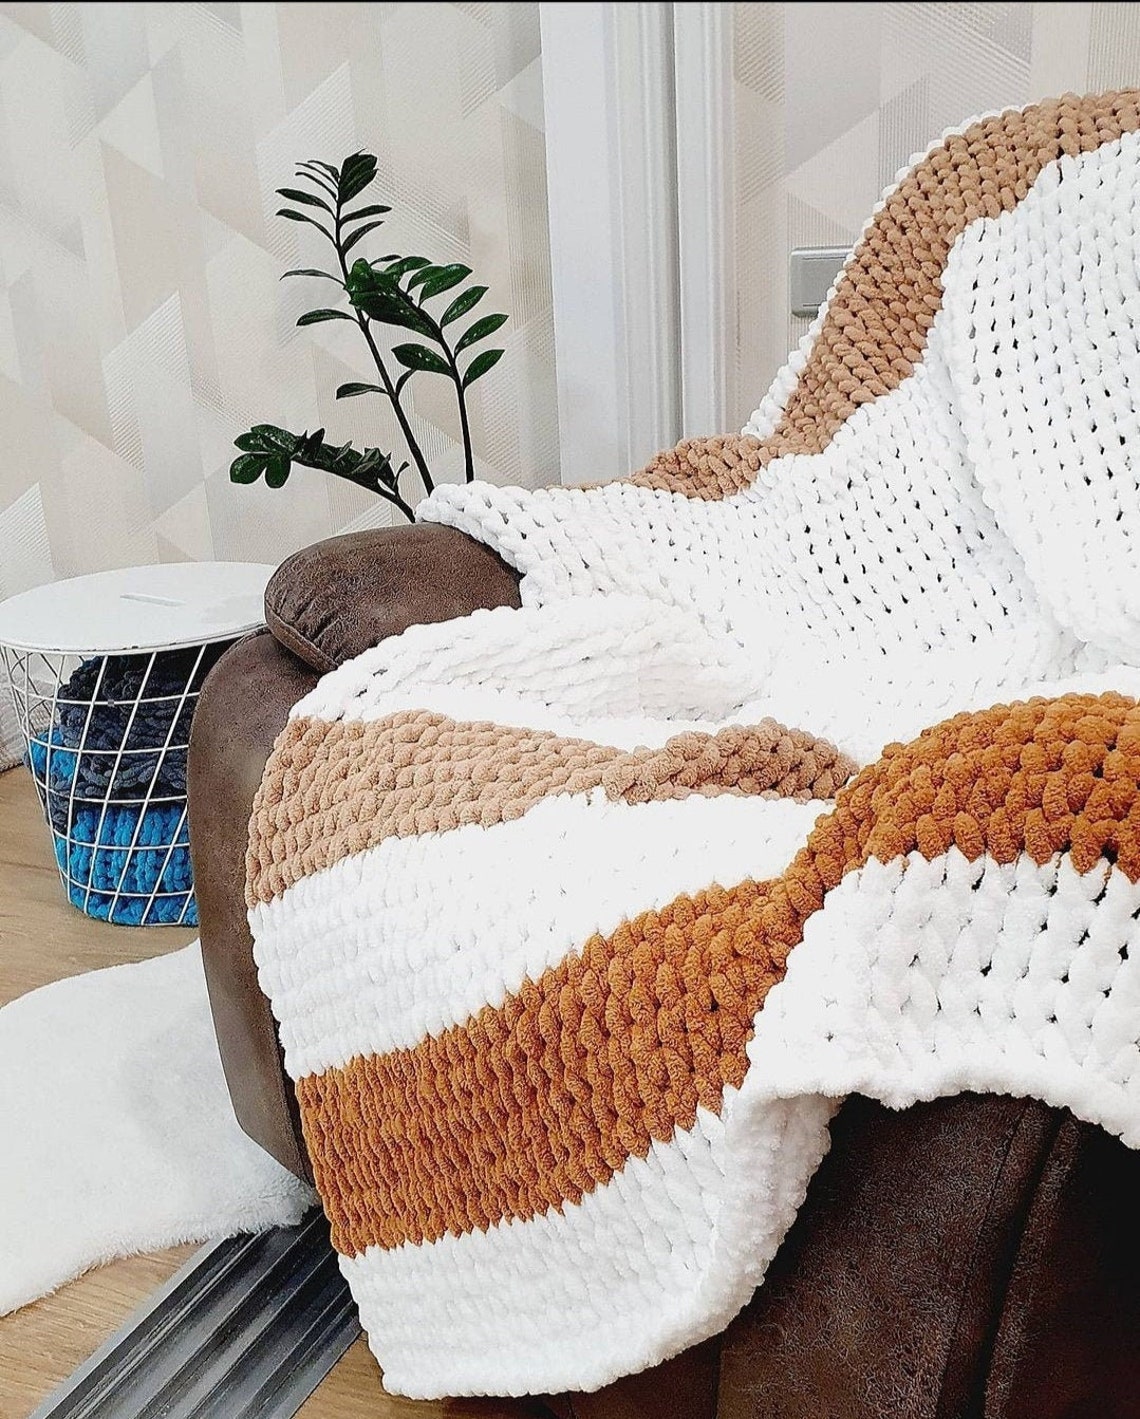 Chunky crochet weighted blanket / picnic knit blanket | Etsy